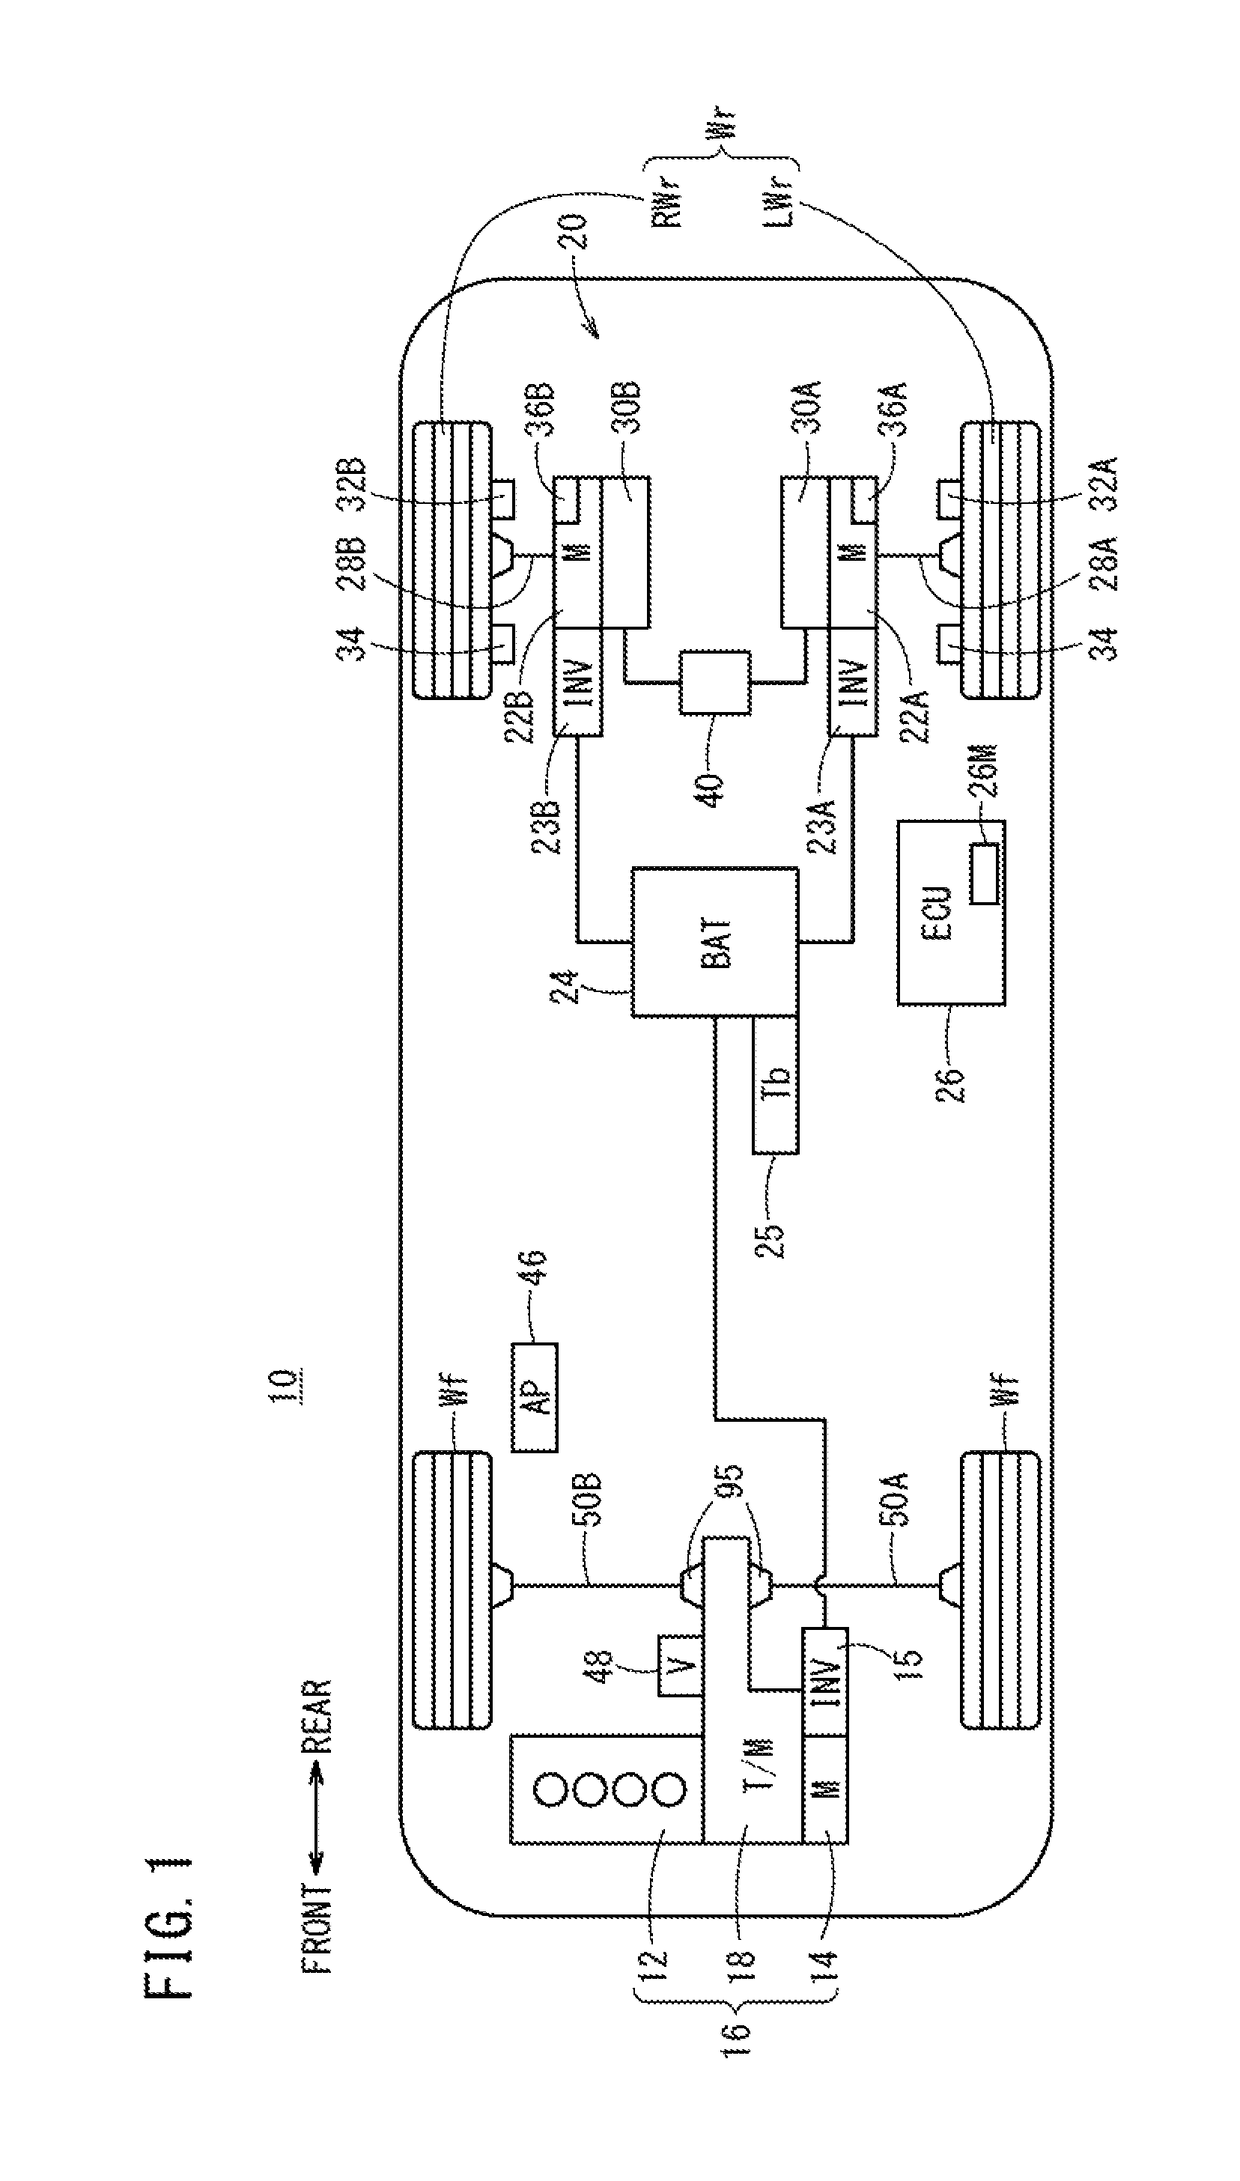 Right and left motor output control for vehicle